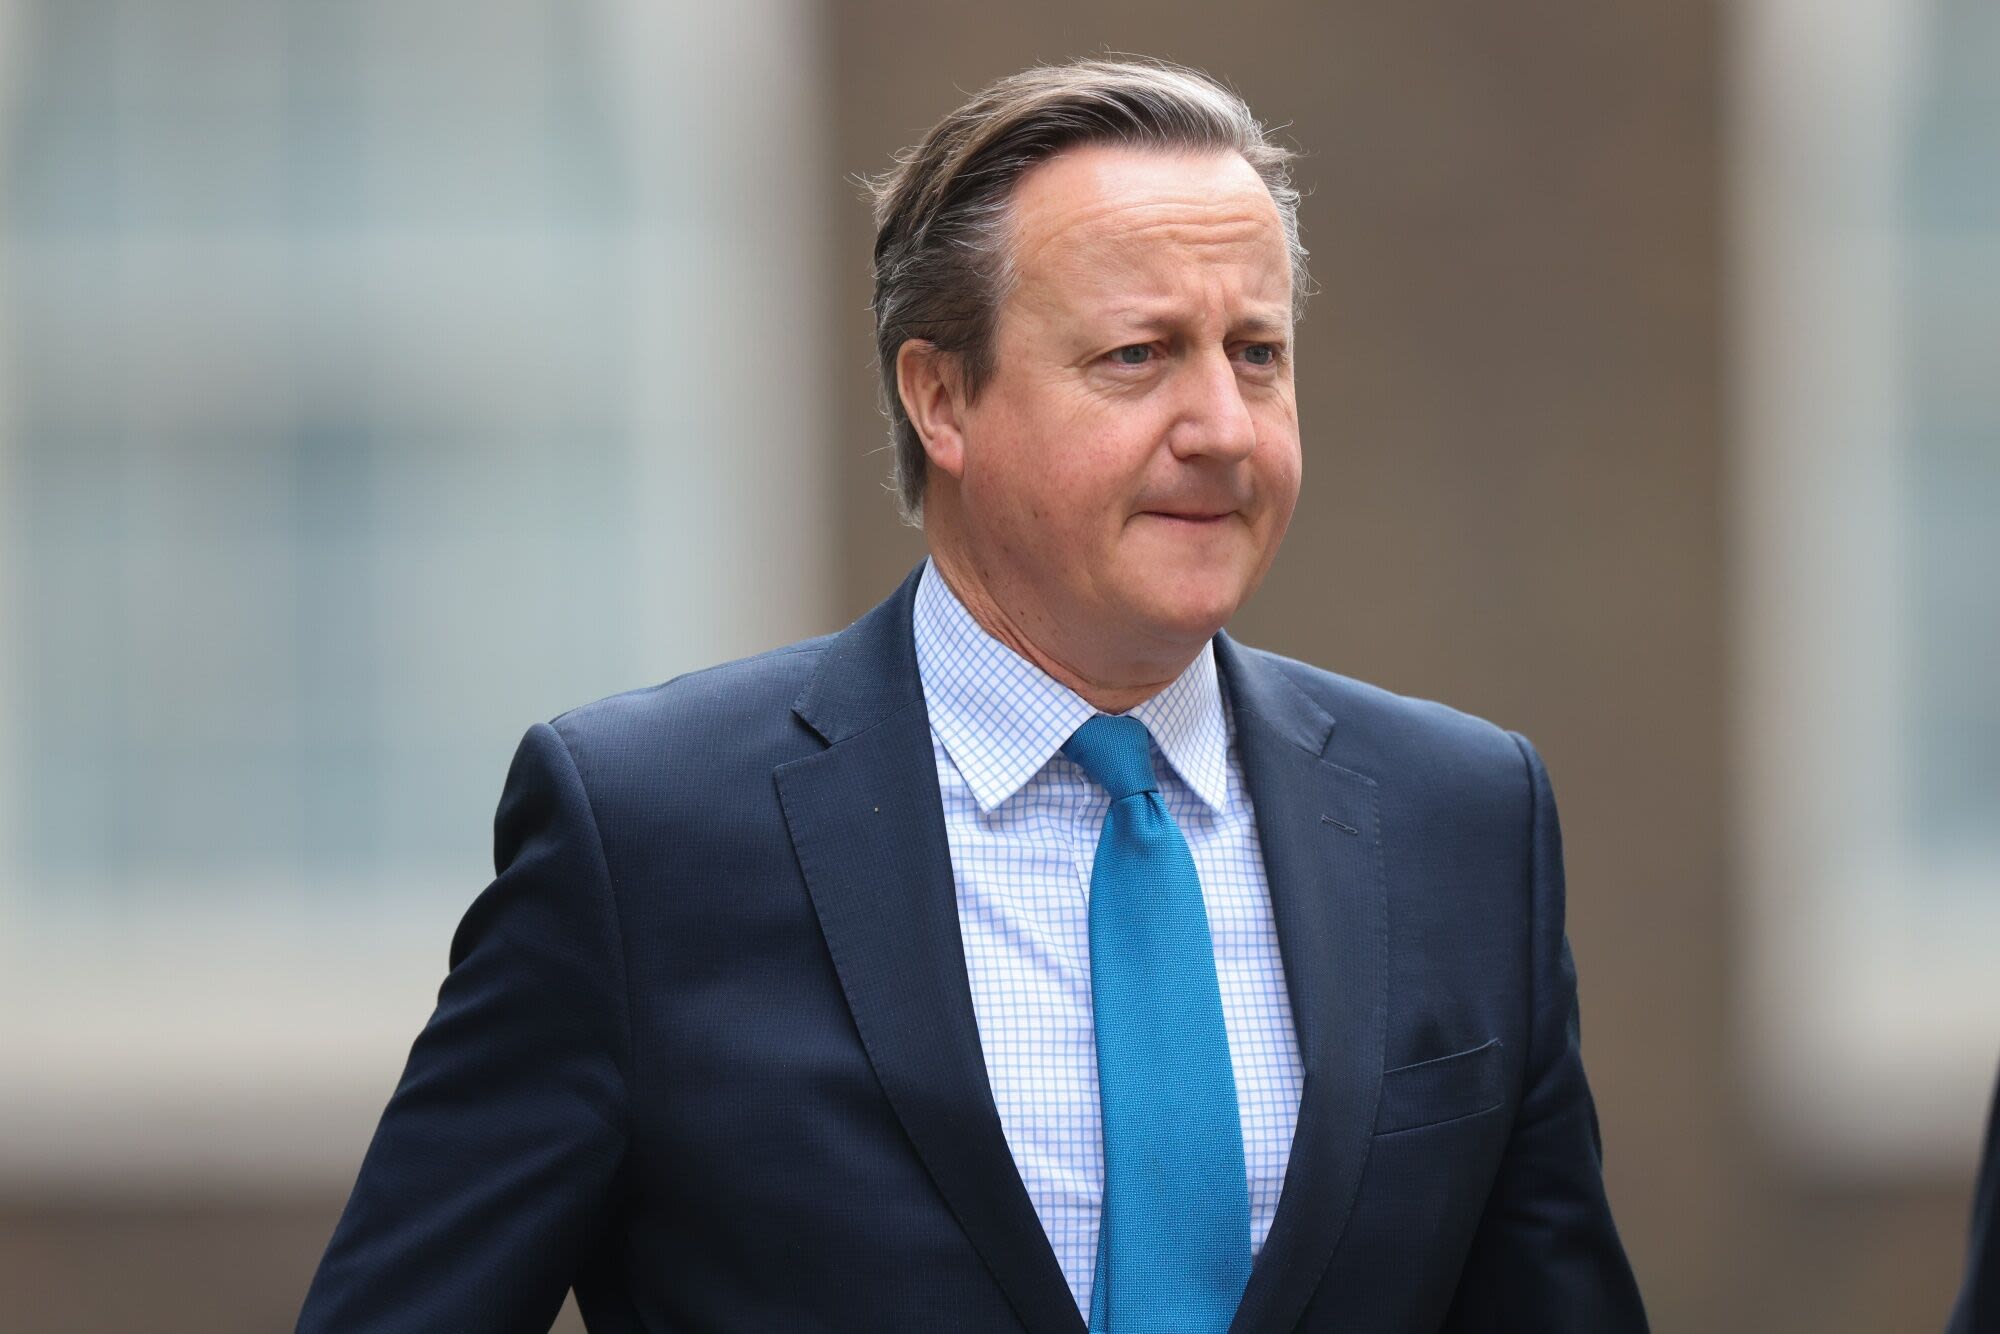 Cameron Takes Aim at Other European Nations on Defense Spending